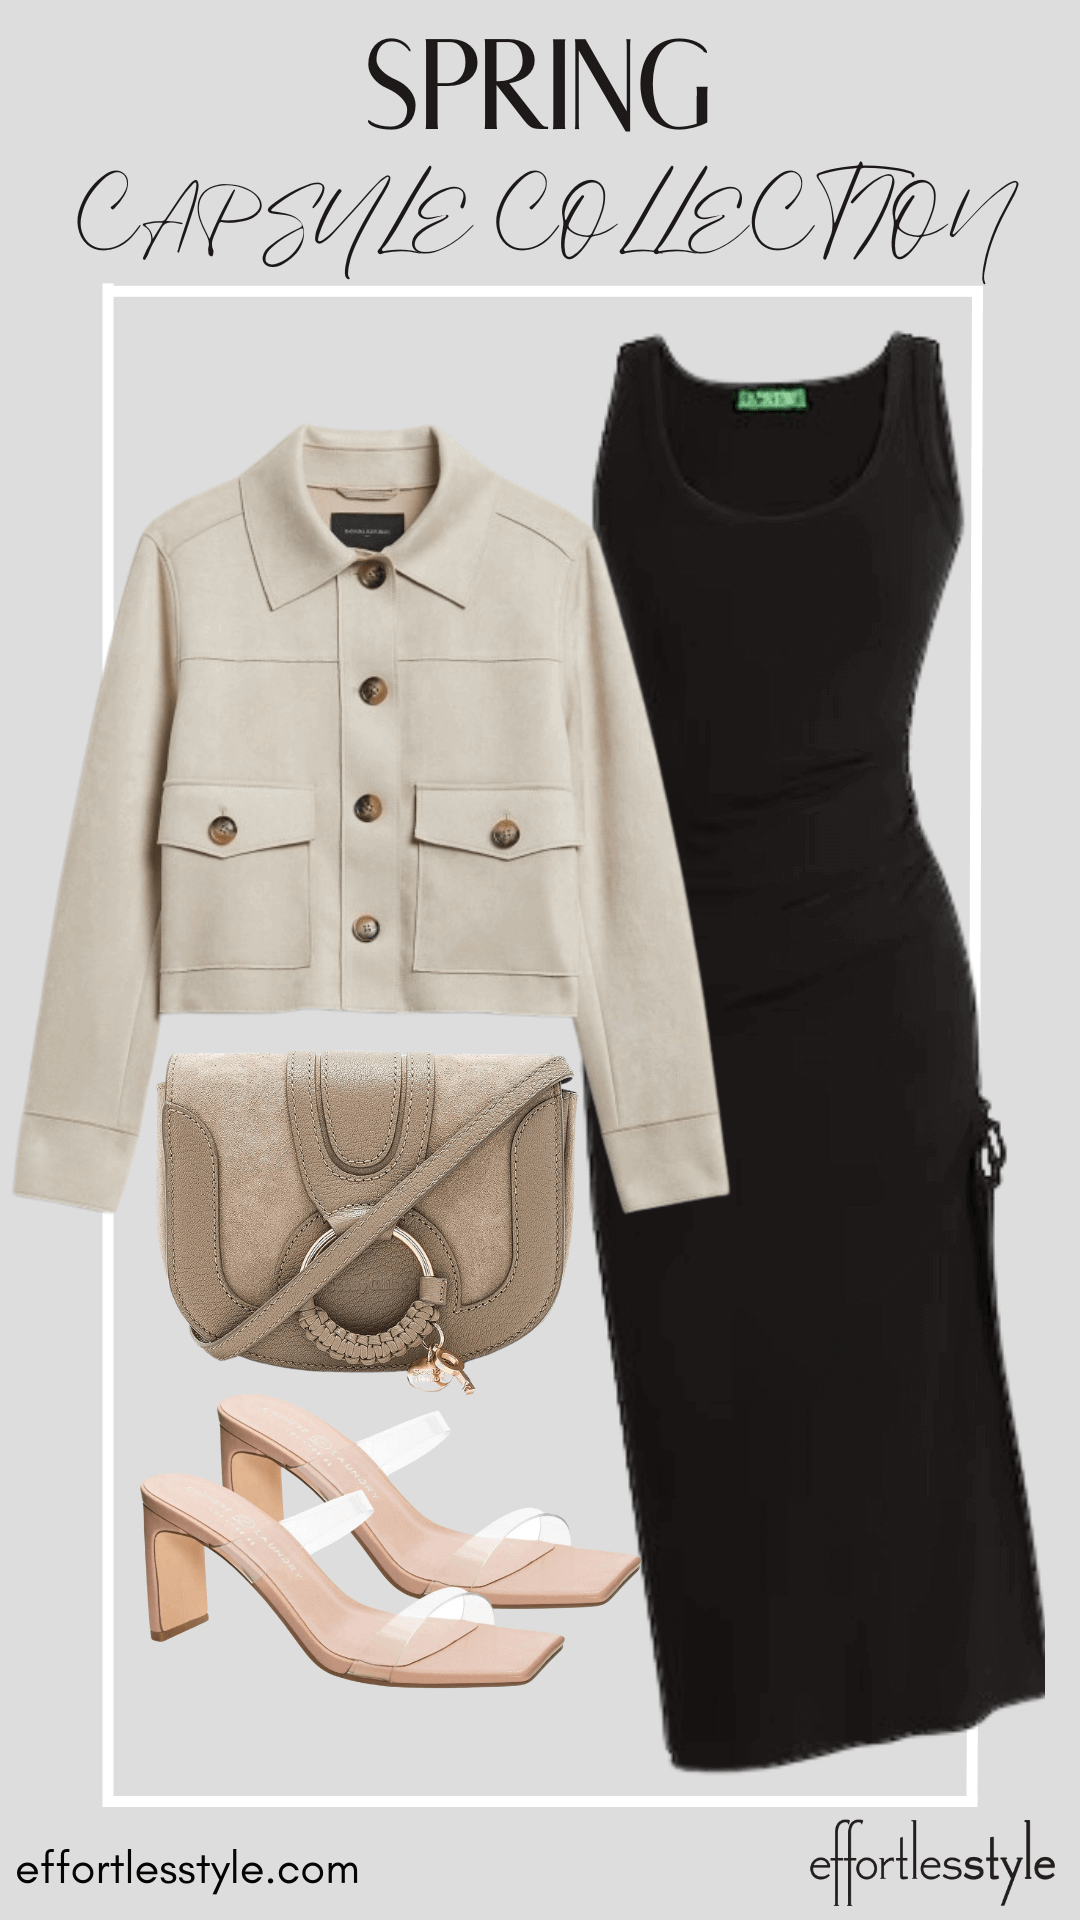 How To Wear Our Spring Capsule Wardrobe - Part 2 Midi Dress & Crop Jacket how to style a crop jacket for spring how to style your midi dress this spring how to wear a midi dress to work how to style a midi dress for the office how to style transparent sandals